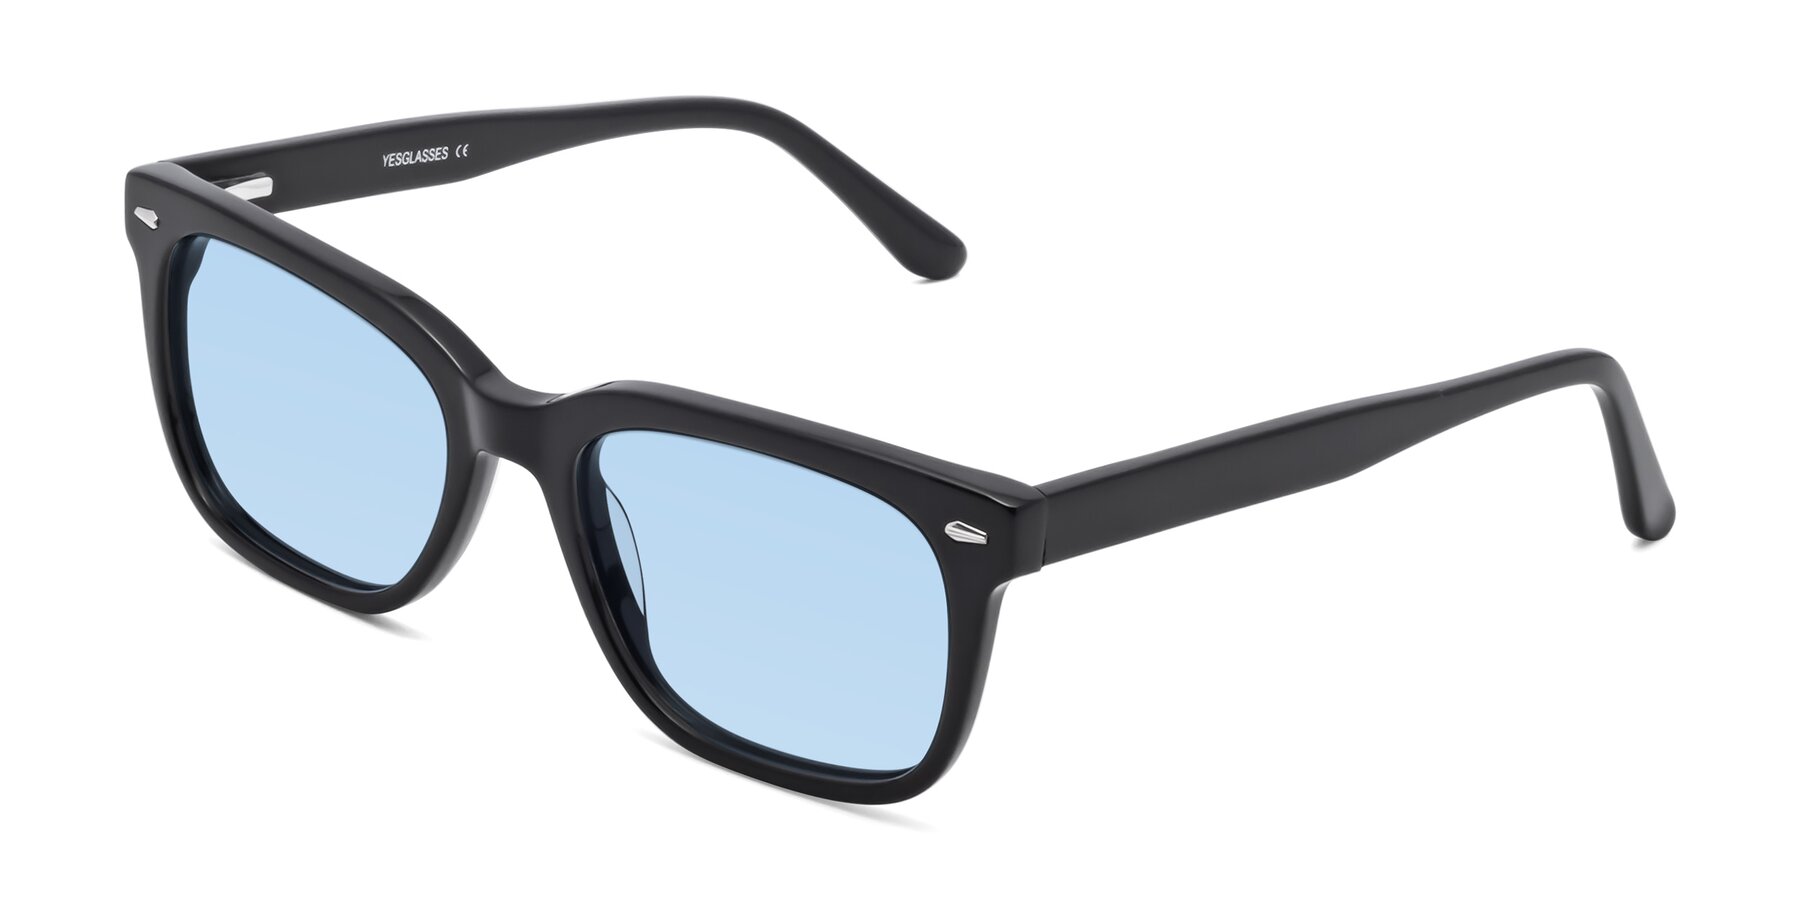 Angle of 1052 in Black with Light Blue Tinted Lenses